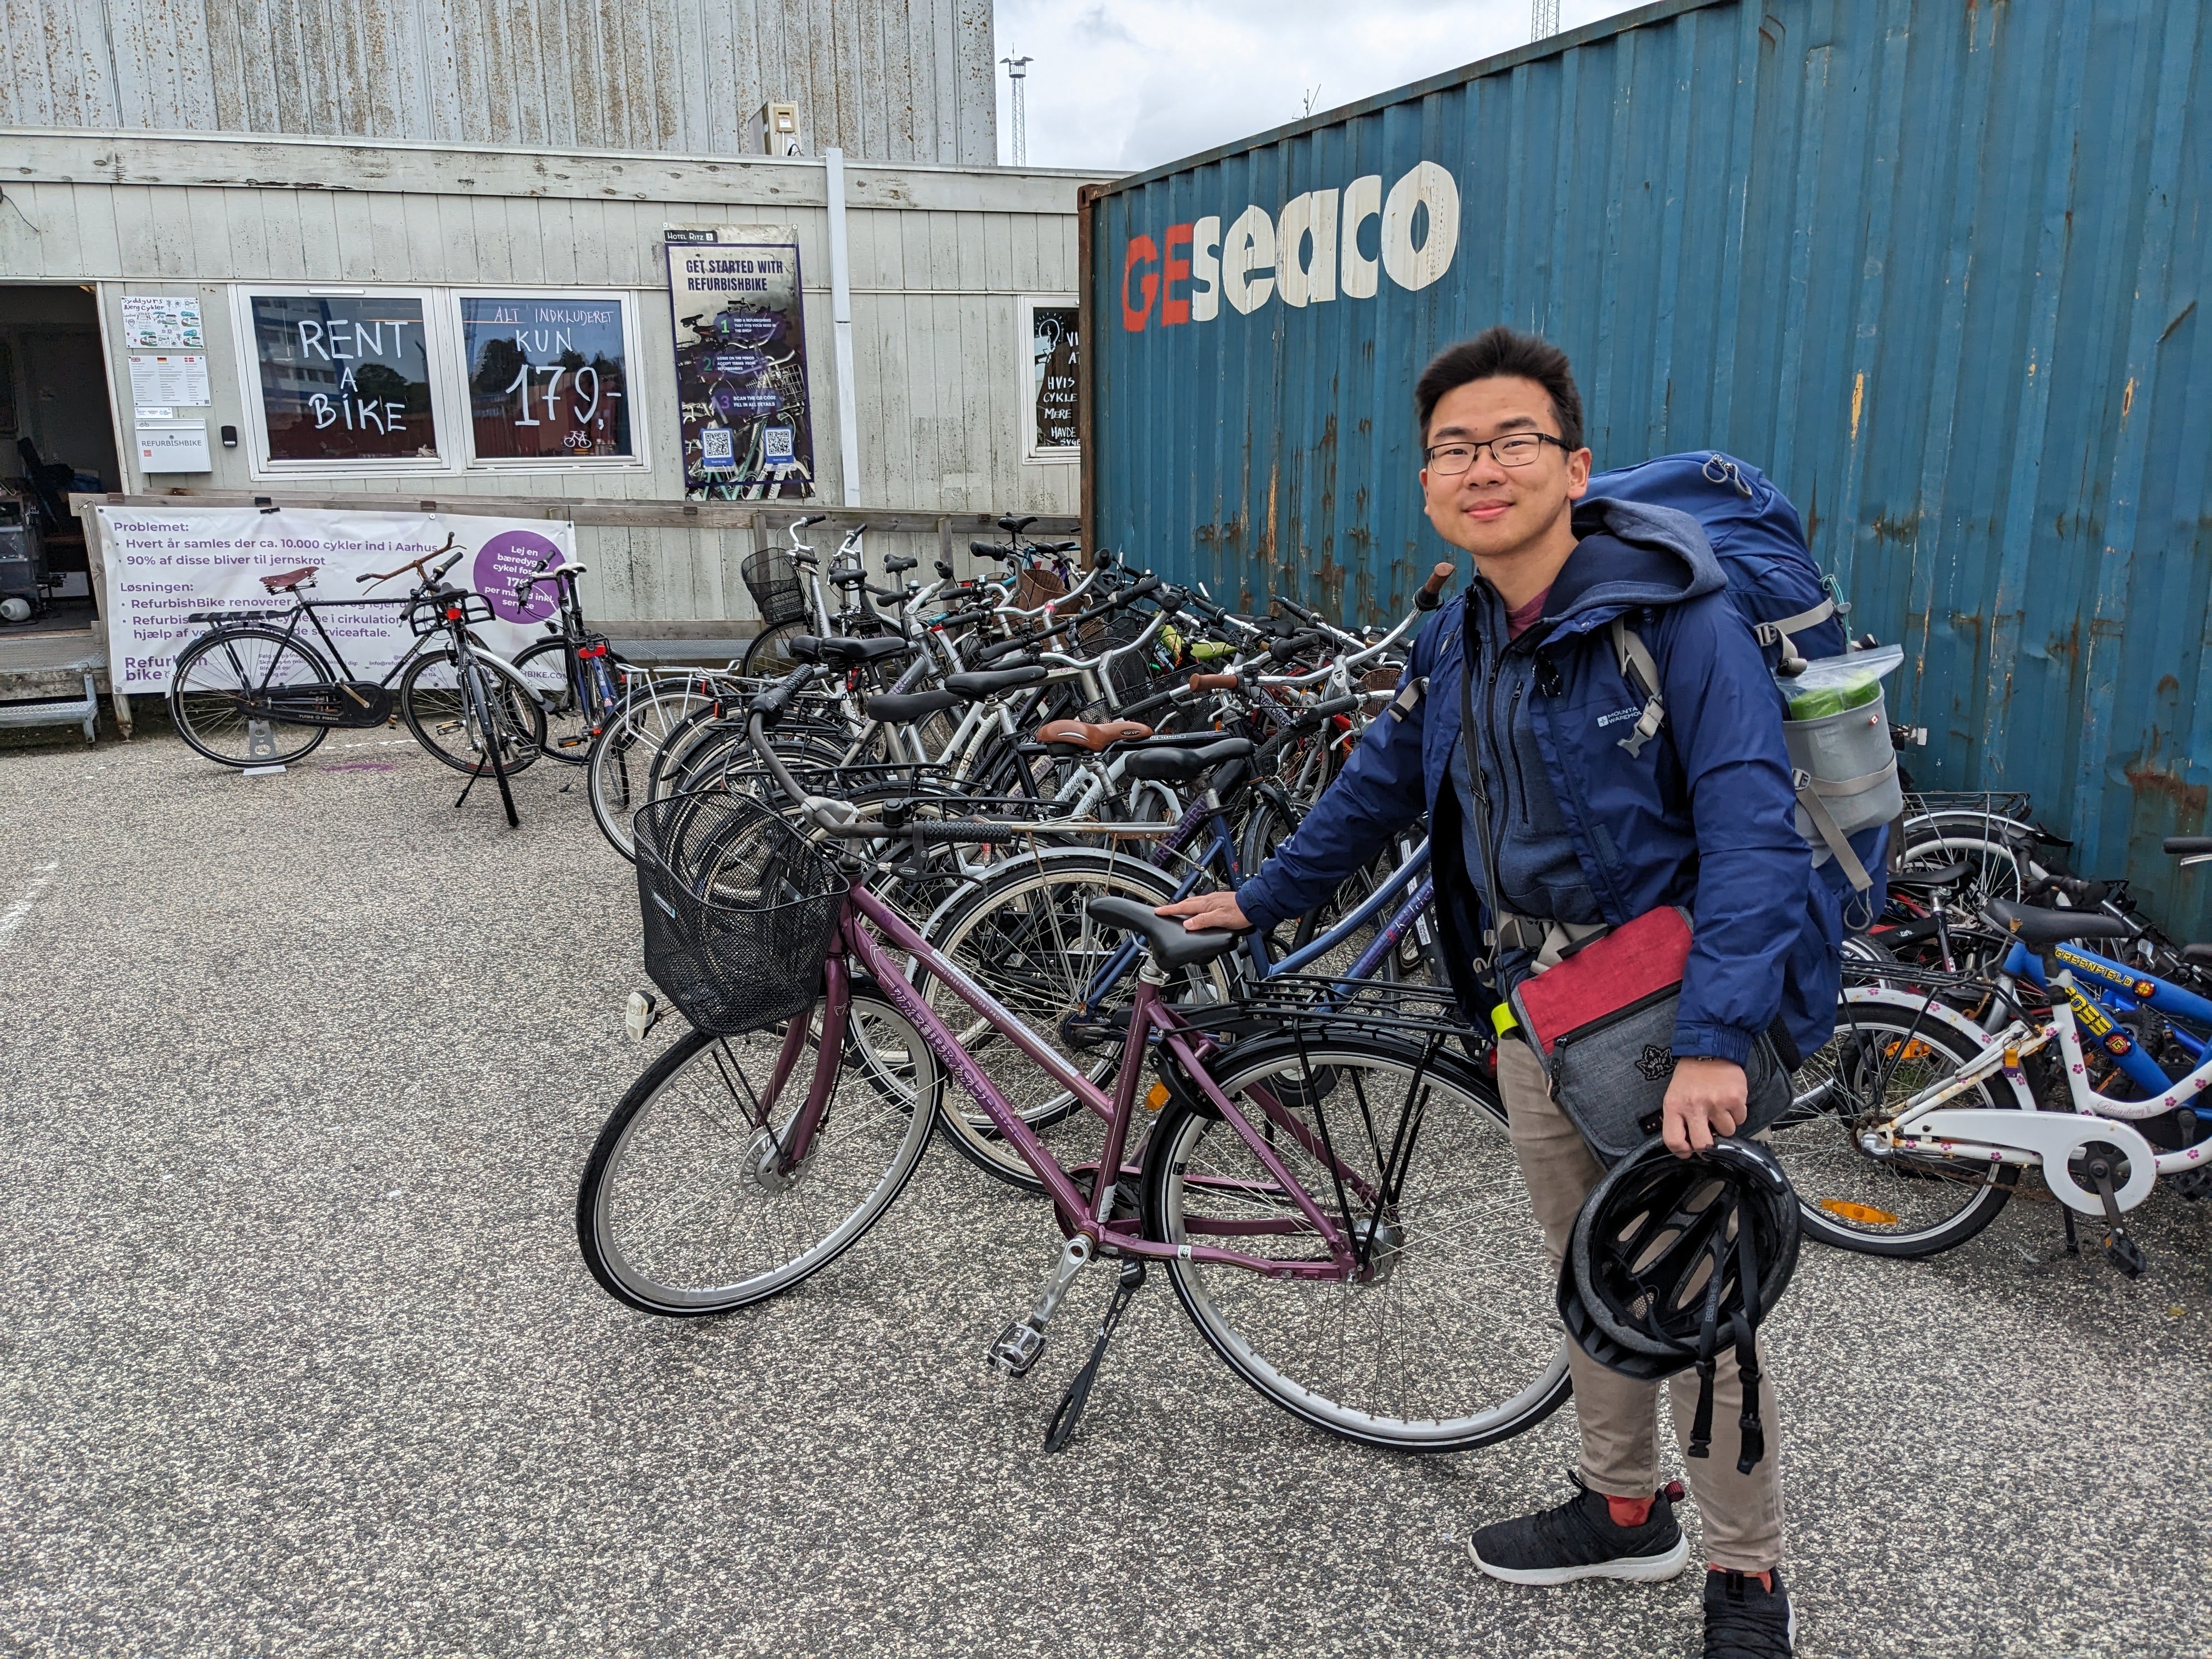 Me posing in front of the bike rental shop with my bike